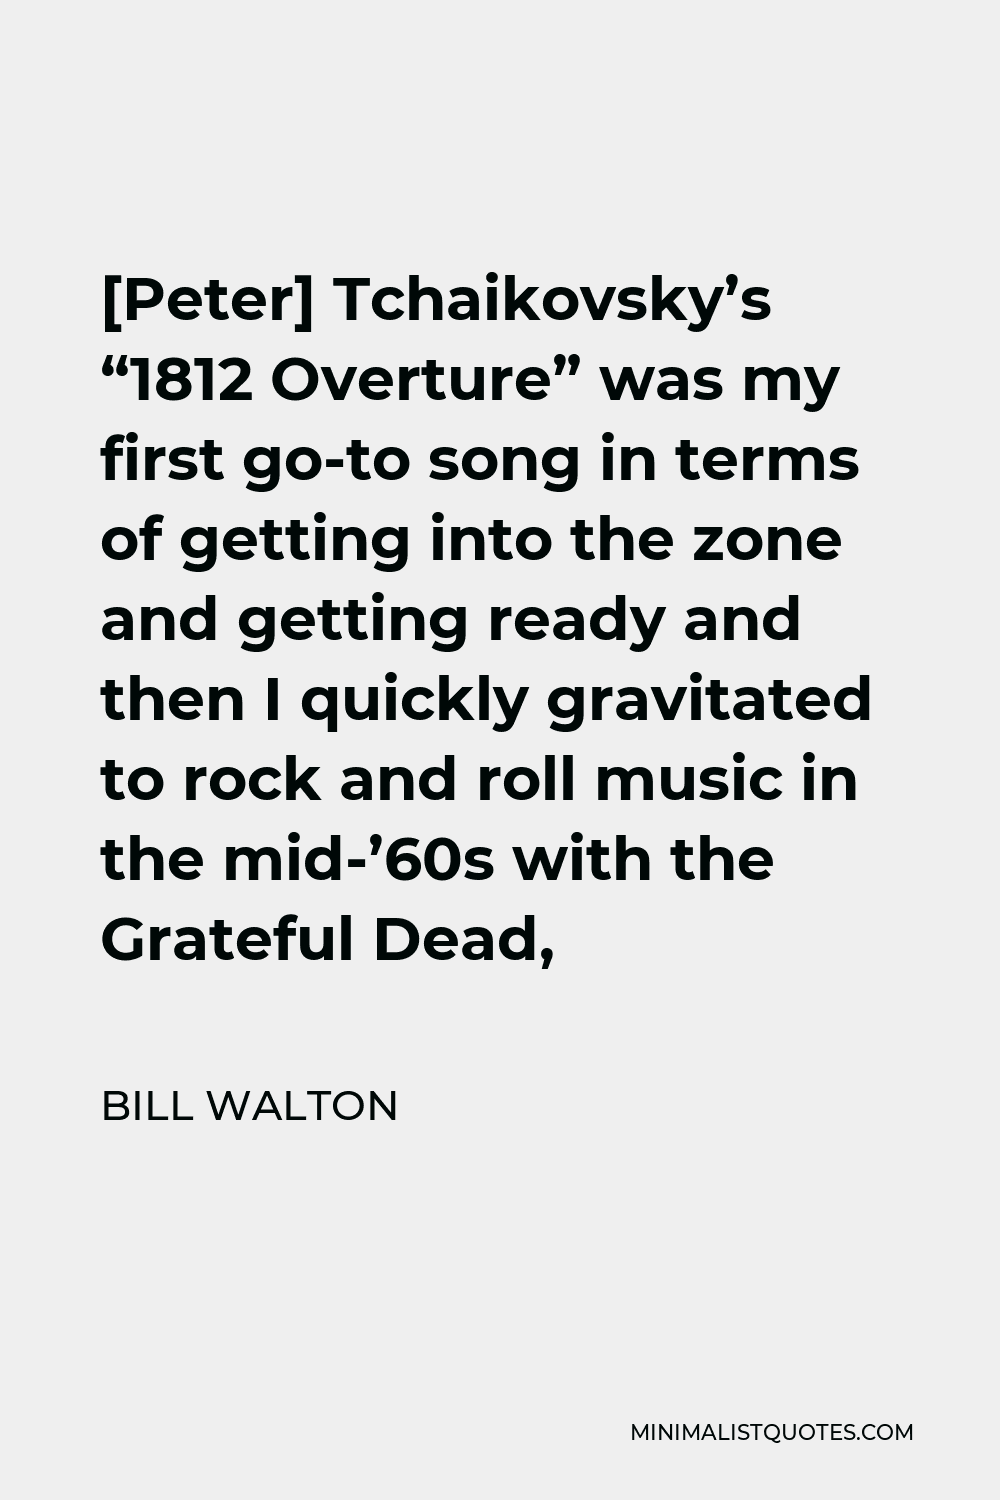 Bill Walton Quote - [Peter] Tchaikovsky’s “1812 Overture” was my first go-to song in terms of getting into the zone and getting ready and then I quickly gravitated to rock and roll music in the mid-’60s with the Grateful Dead,